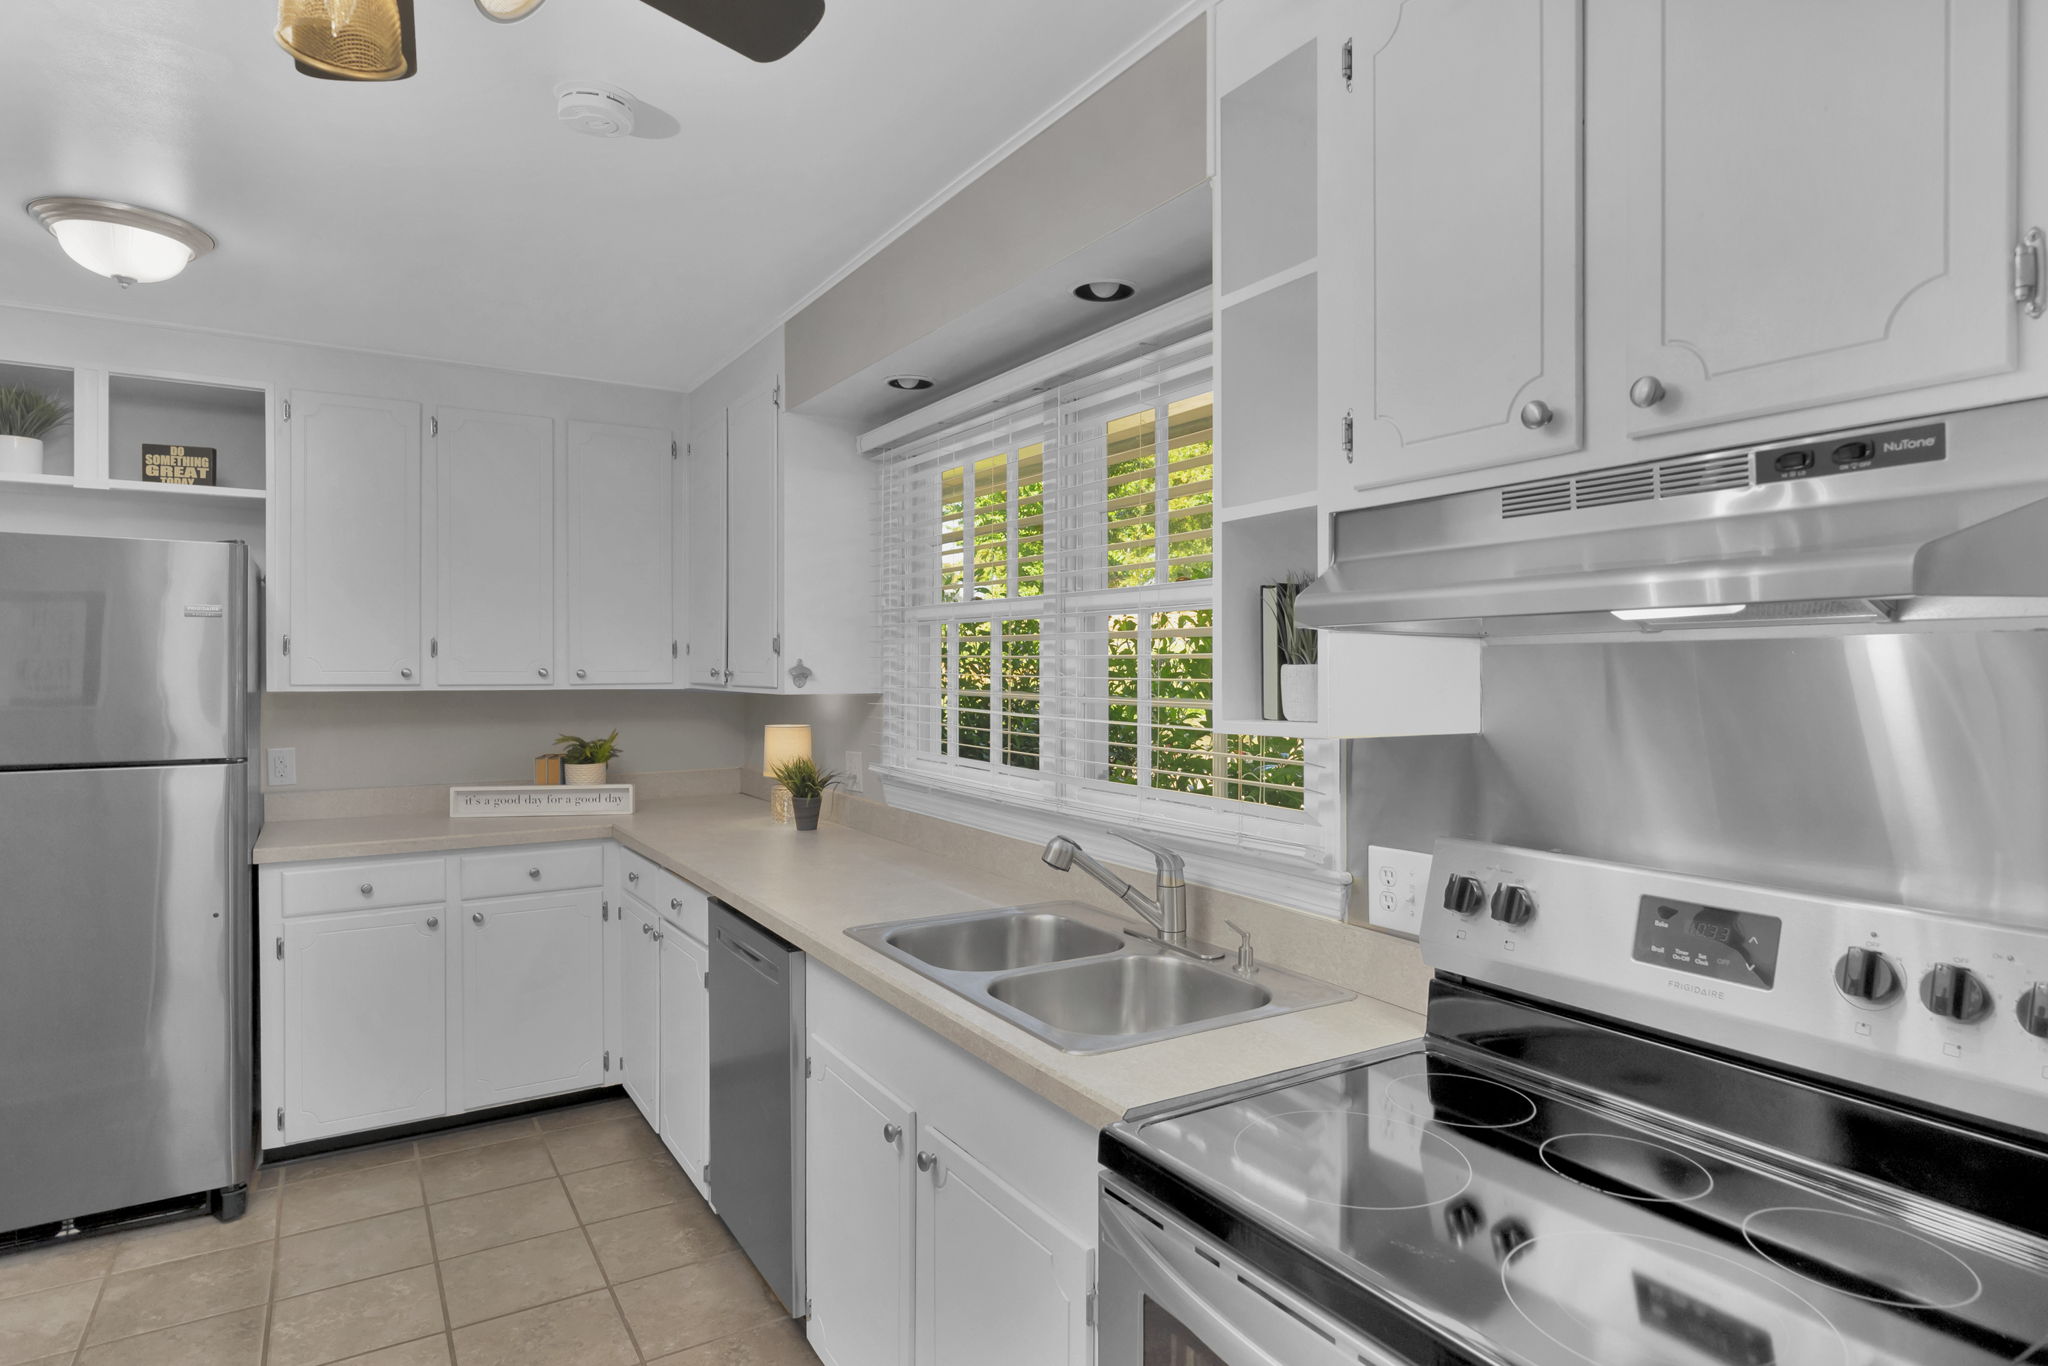 Stainless appliances in kitchen